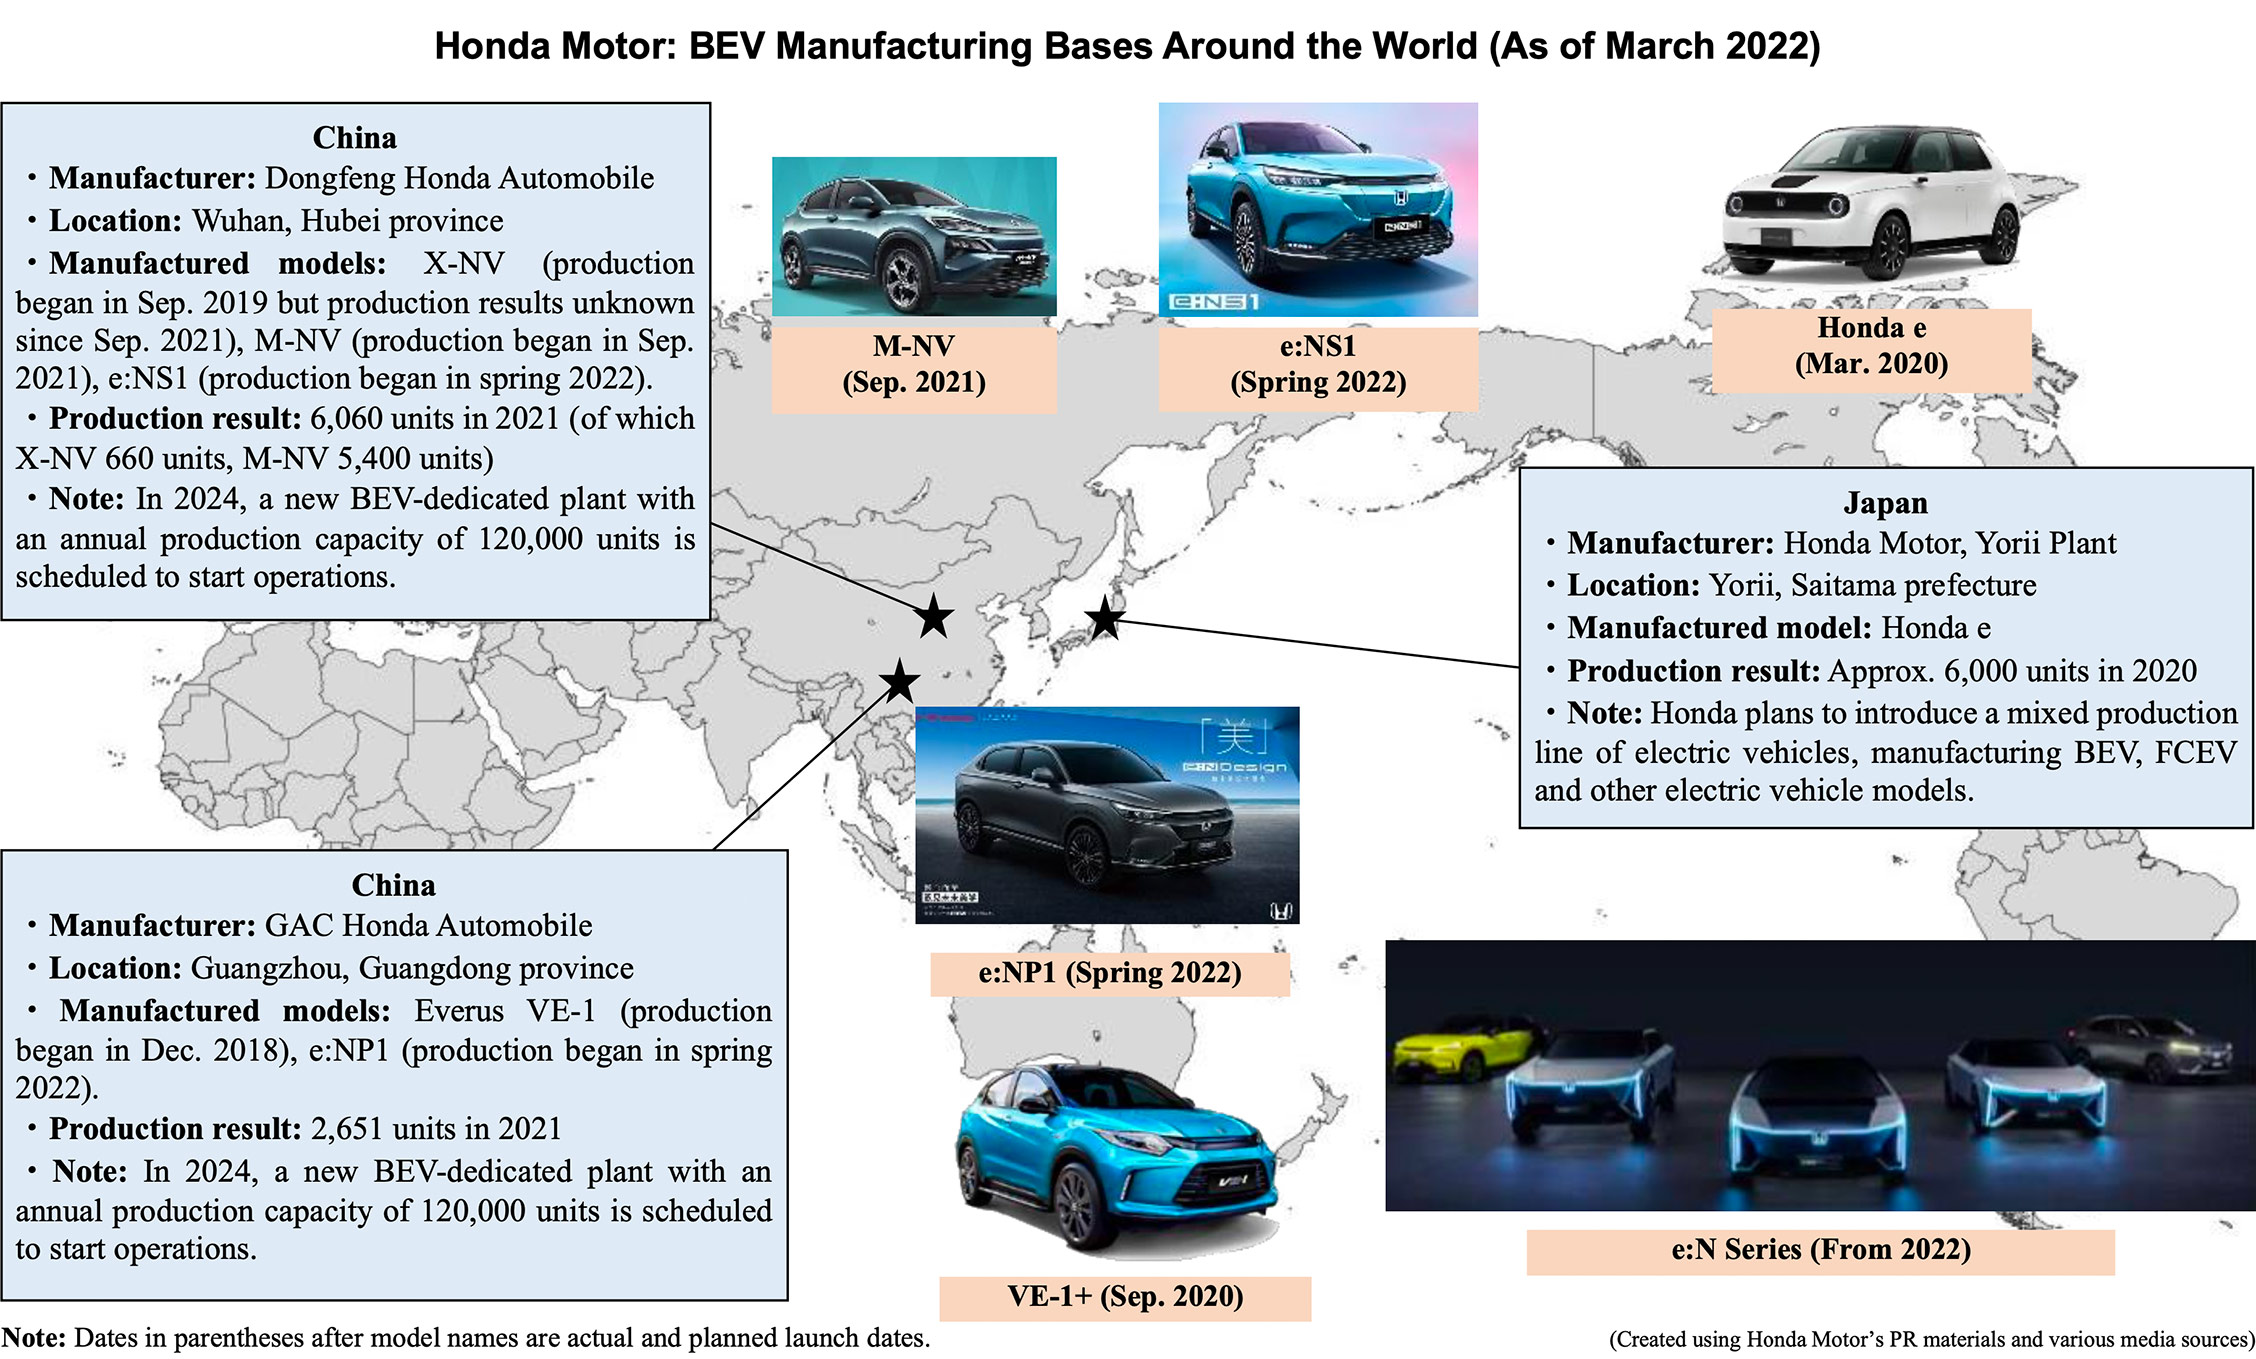 Map infographic: Honda Motor: BEV Manufacturing Bases Around the World (As of March 2022)